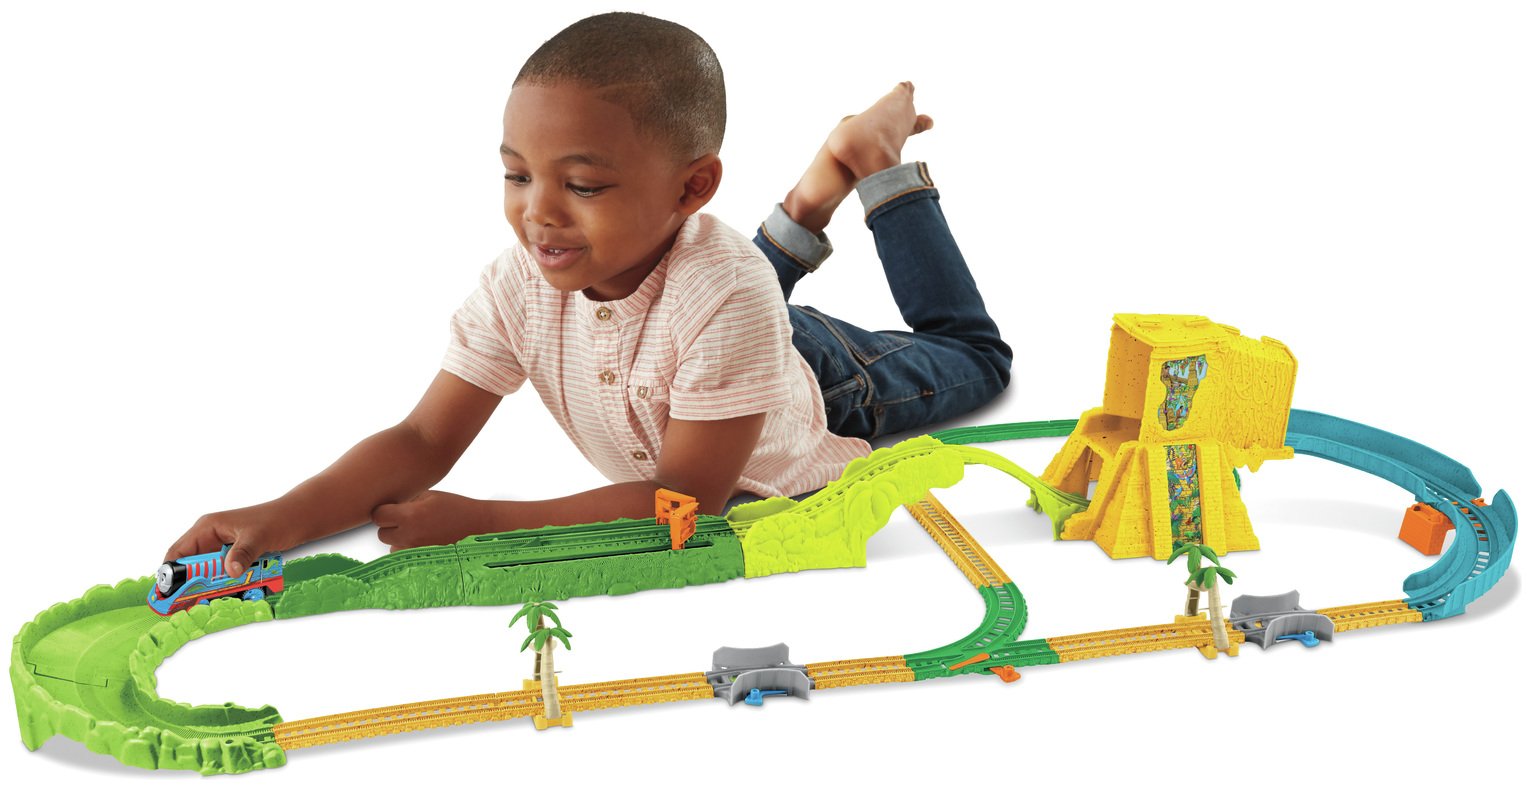 Fisher-Price Thomas & Friends TrackMaster Turbo Jungle Set review